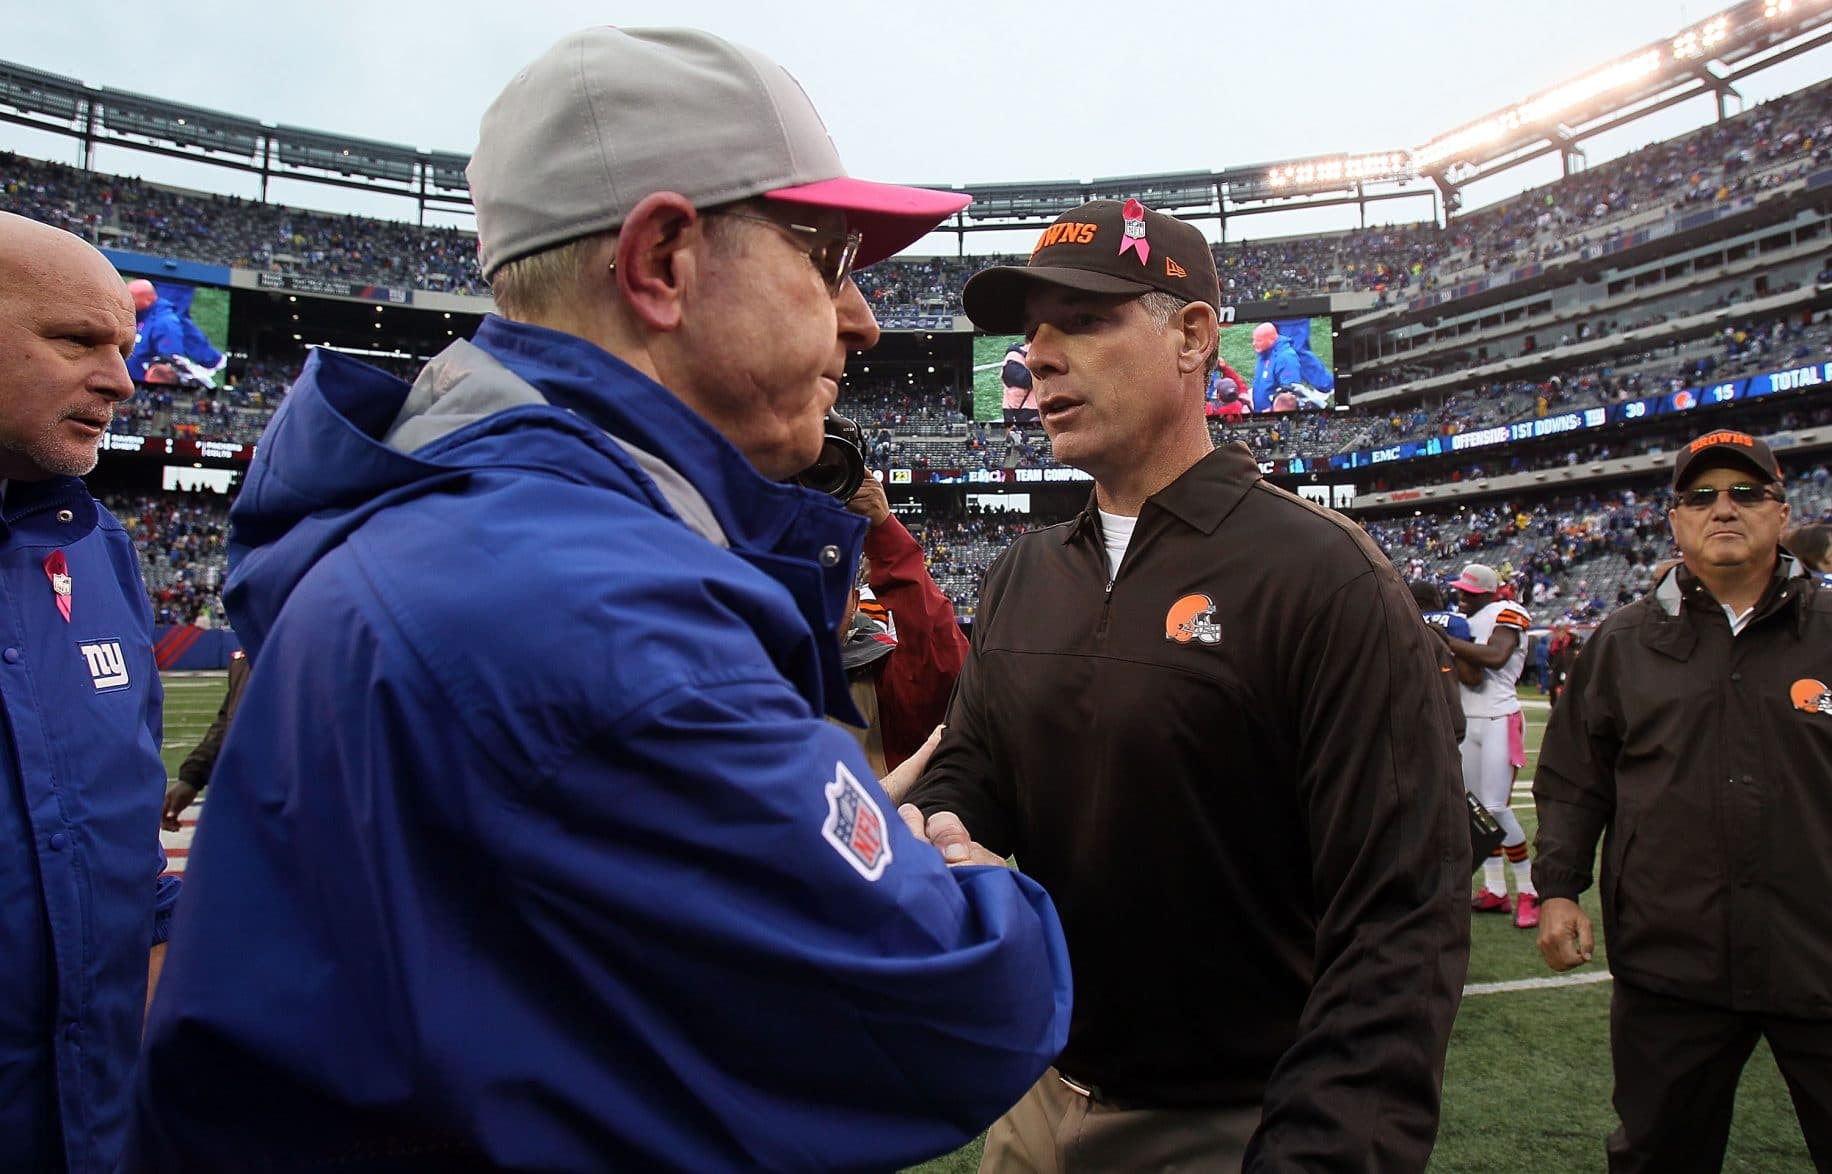 EAST RUTHERFORD, NJ - OCTOBER 07: Cleveland Browns head coach Pat Shurmur meets with New York Giants head coach Tom Coughlin after their game at MetLife Stadium on October 7, 2012 in East Rutherford, New Jersey. 